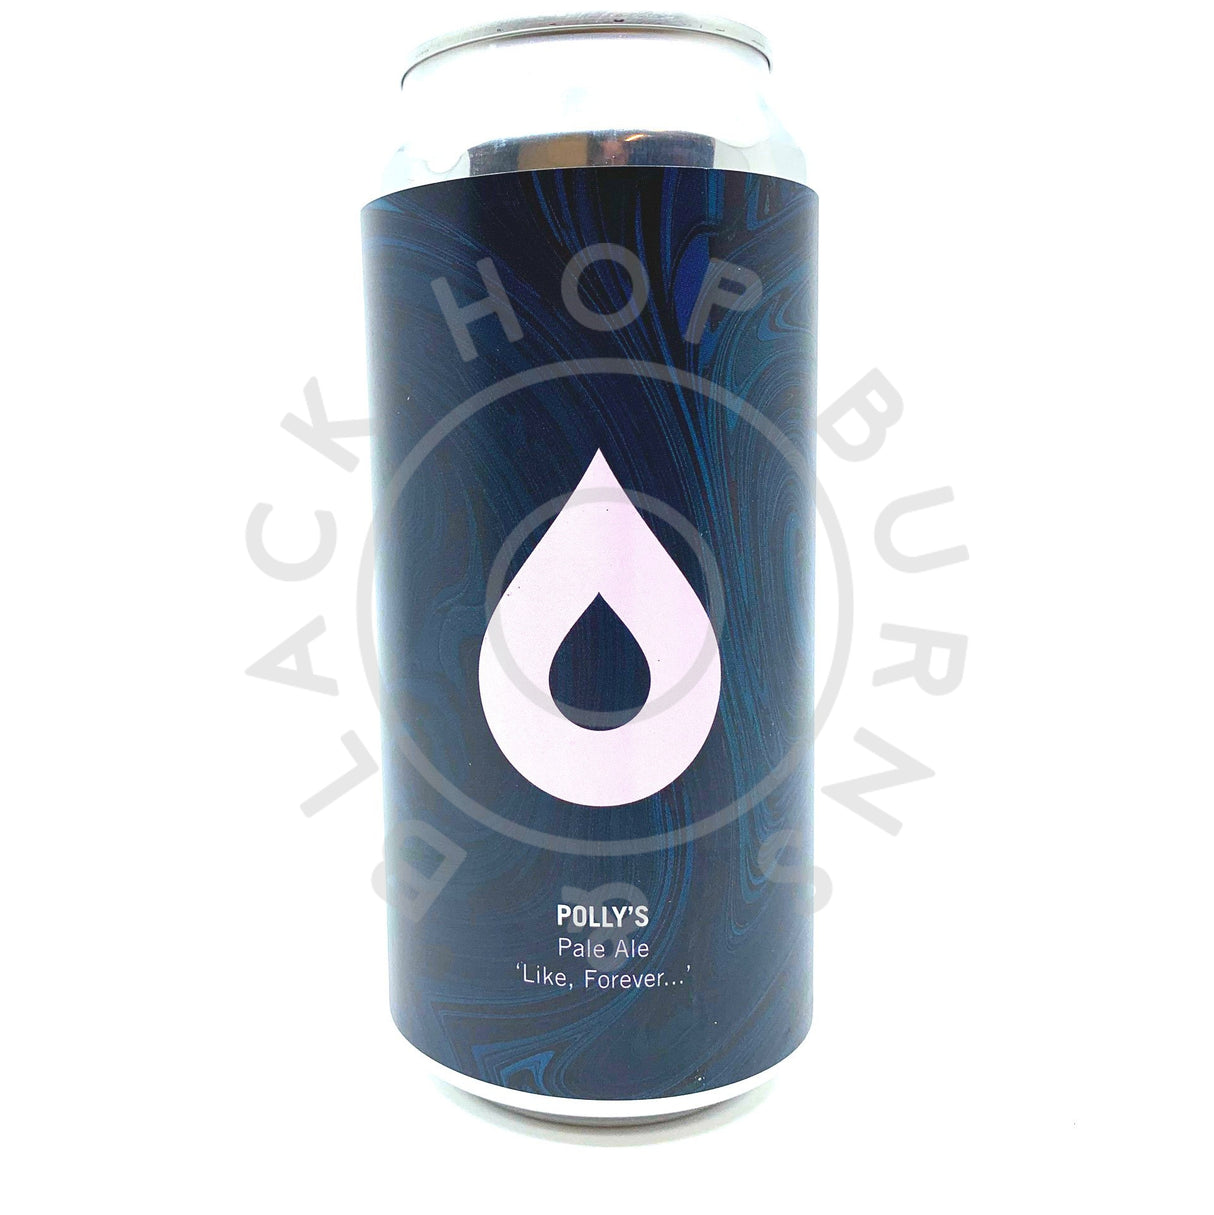 Polly's Brew Co Like, Forever Pale Ale 5.2% (440ml can)-Hop Burns & Black